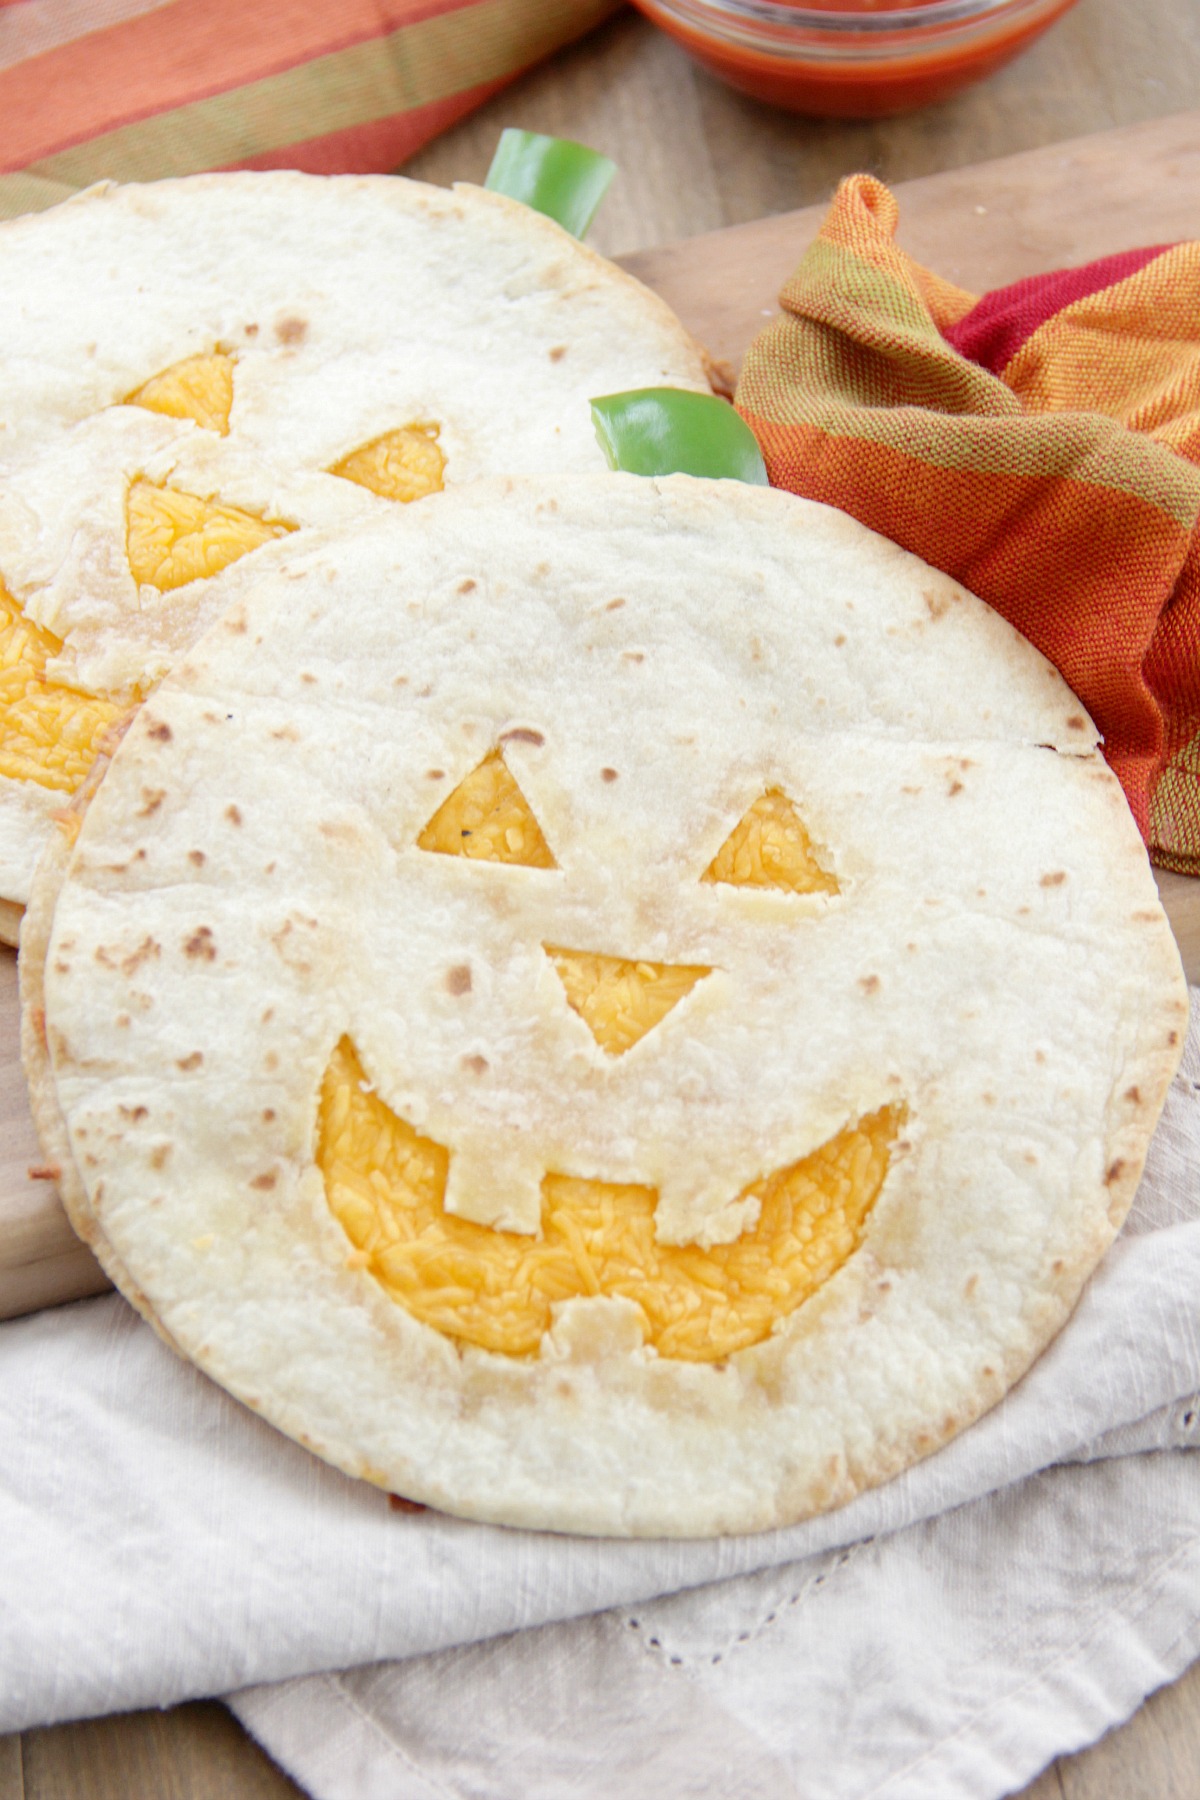 These quesadillas would be perfect to make for a quick lunch or dinner before trick-or-treating. Just serve them up with some salsa and of course, guacamole! Happy Halloween!